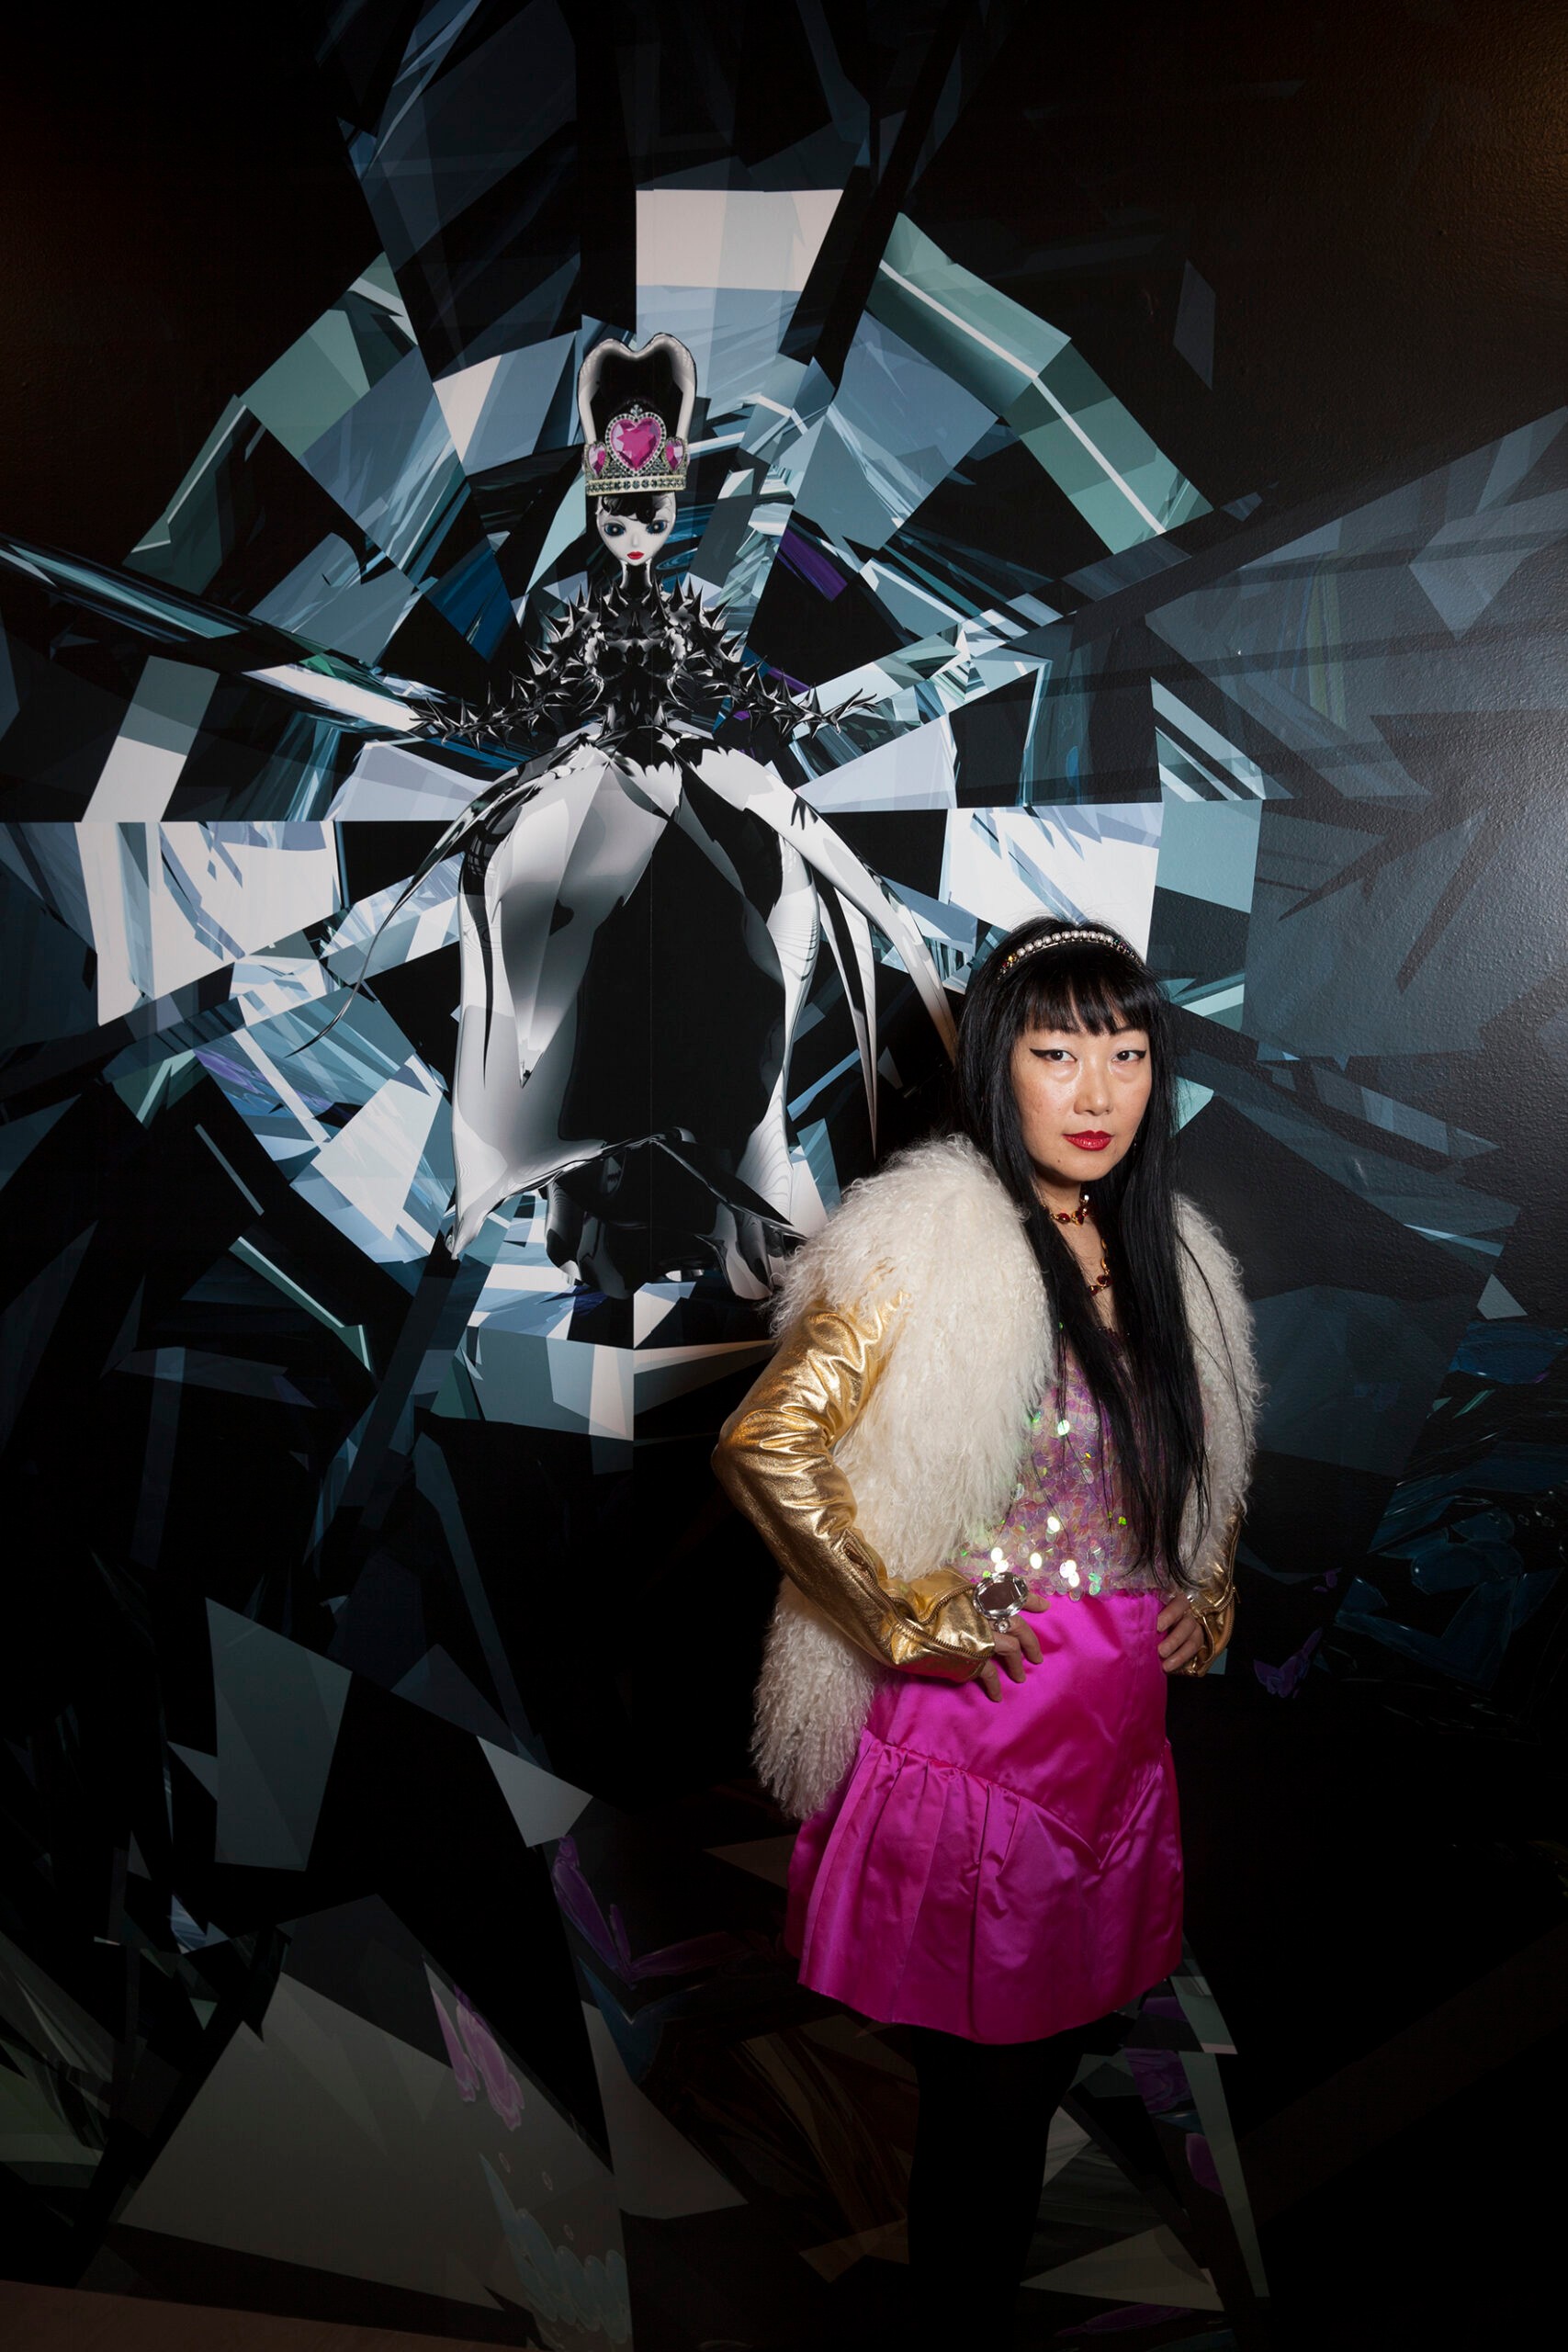 A woman with long dark hair poses in front of an artwork with a crystal design. She is wearing a hot pink dress, gold gloves, fur and a sparkly headband.